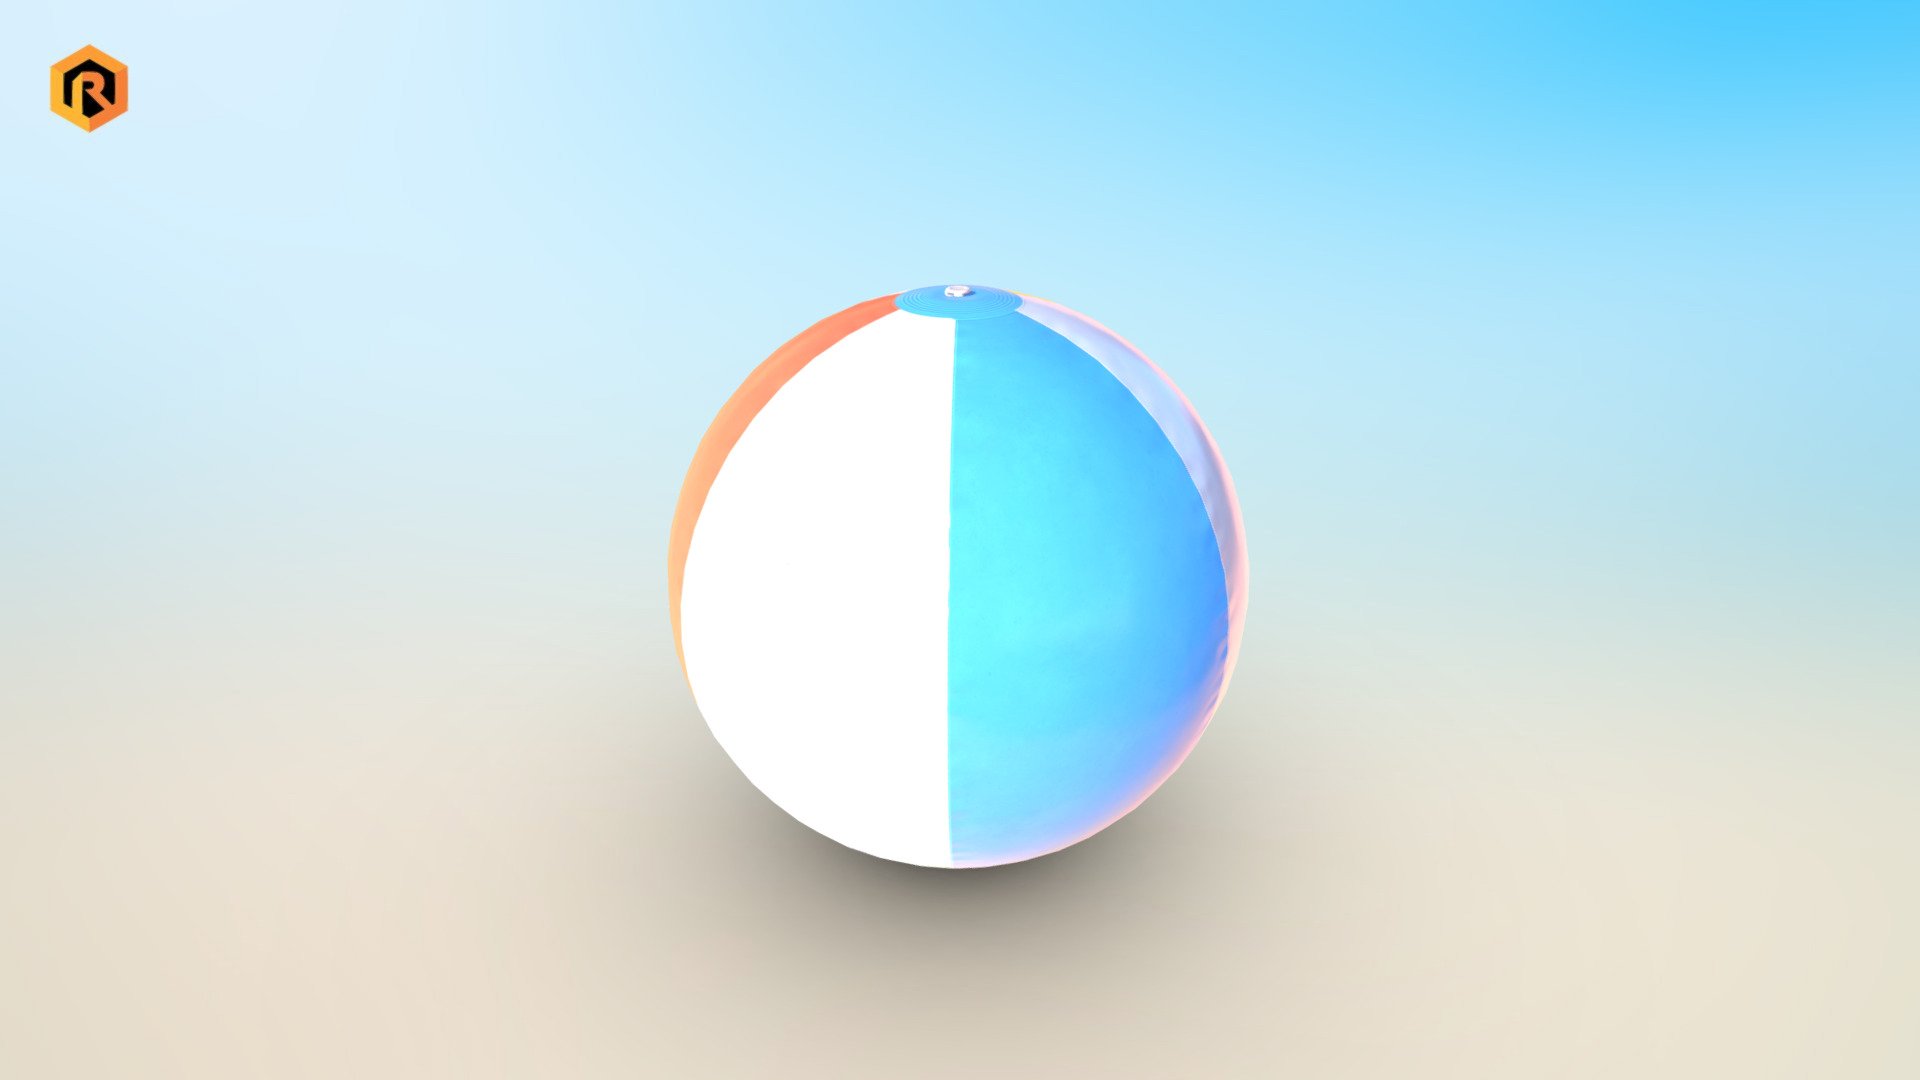 High-quality low-poly PBR 3D model of Inflatable Beach Ball. 

It is best for use in games and other VR / AR, real-time applications such as Unity or Unreal Engine.

It can also be rendered in Blender (ex Cycles) or Vray as the model is equipped with all required PBR textures. 

Model is built with great attention to details and realistic proportions with correct geometry.

PBR texture sets are very detailed so it makes this model good enough for close-up.  

Technical details:

- PBR BeachBall texture set 2048 (Albedo, Metallic, Smoothness, Normal, AO)

- 1910 Triangles

- 1230  Vertices 
- Model is one mesh 
- Model completely unwrapped

- Model is fully textured with all materials applied

- Pivot points are correctly placed to suit animation process

- Model scaled to approximate real world size (centimeters)

- All nodes, materials and textures are appropriately named - Beach Ball - Buy Royalty Free 3D model by Rescue3D Assets (@rescue3d) 3d model